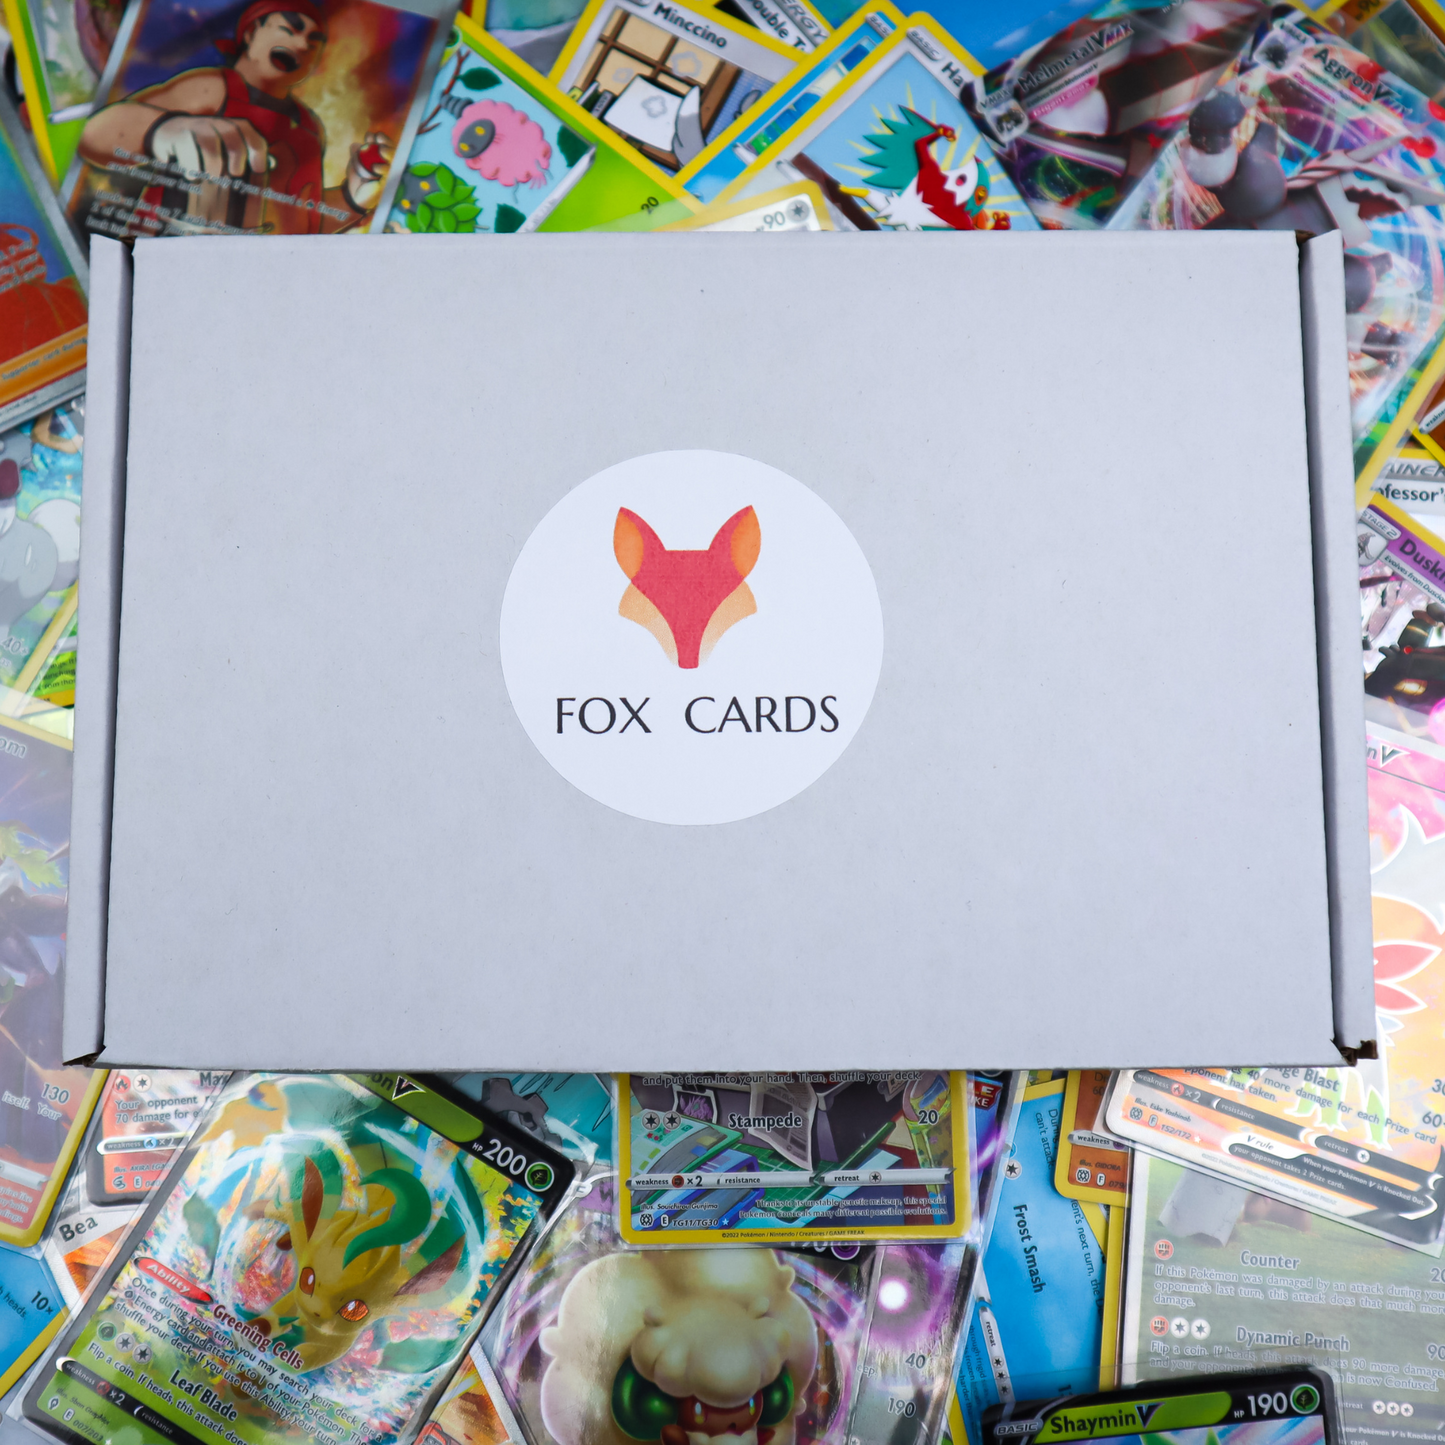 FOXCARDS - MYSTERY BOX